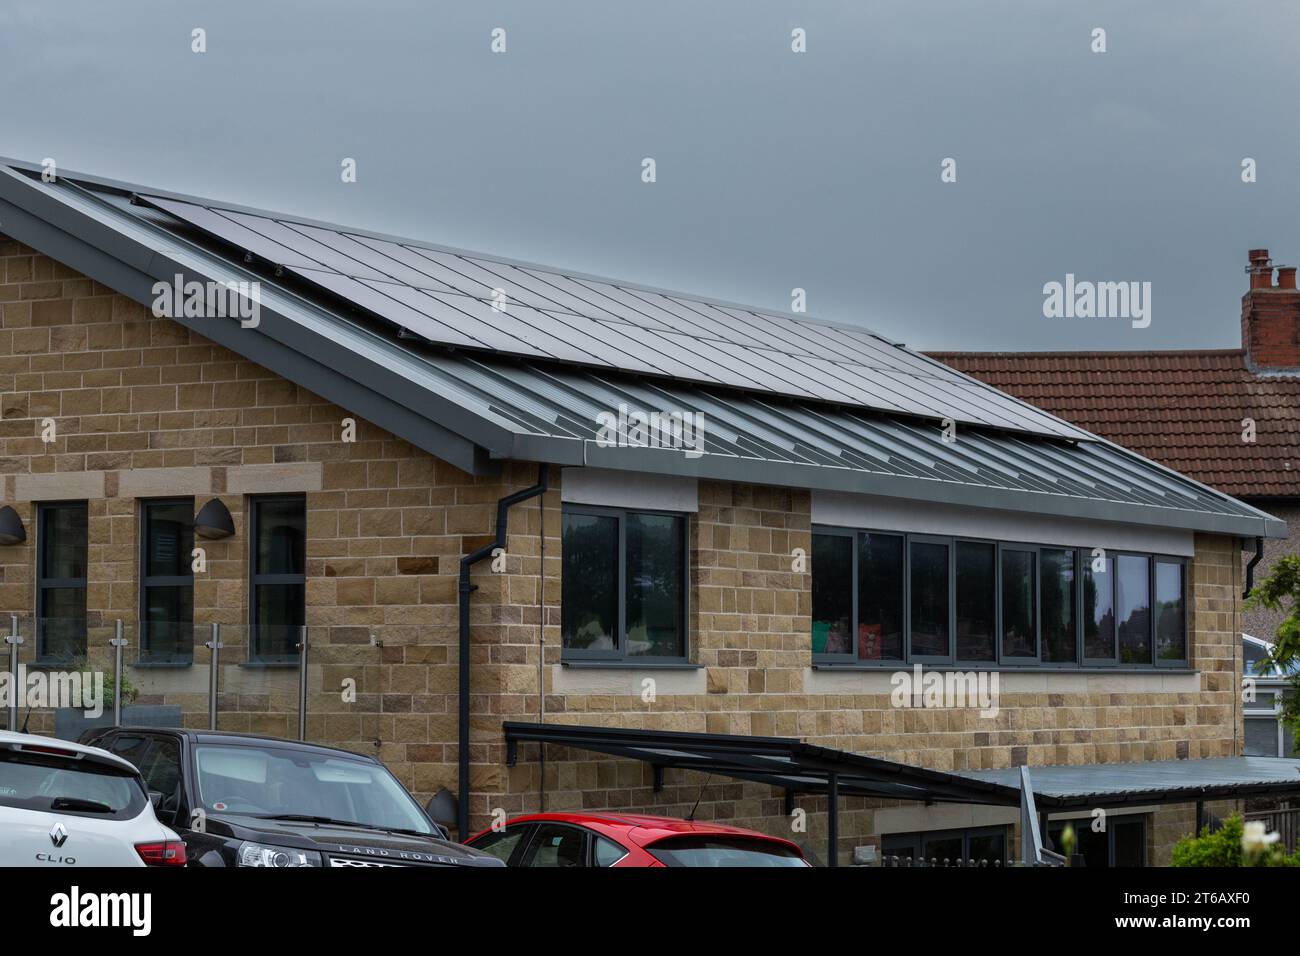 Solar Panels (PV panels) on the roof of Baildon Methodist Church. This  is a forward looking church that cares for the environment. Stock Photo